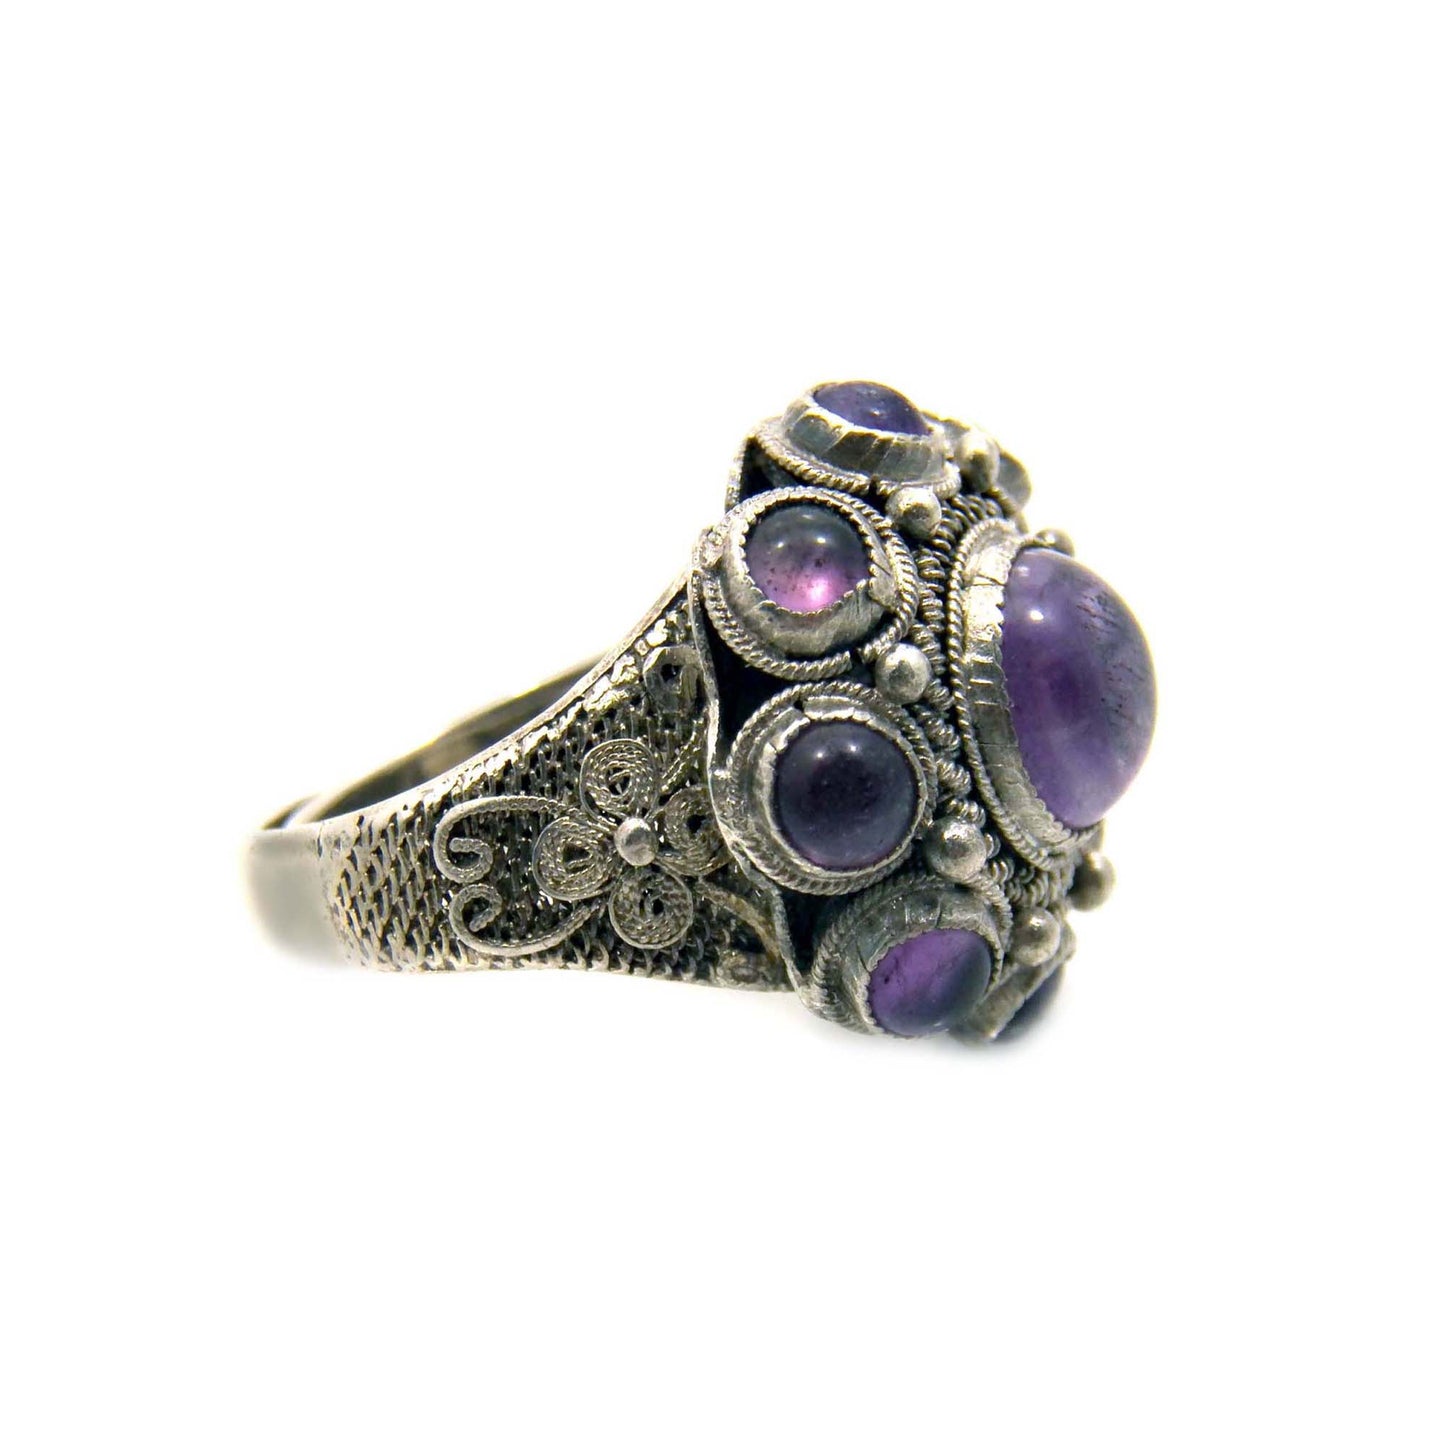 Chinese Antique Amethyst Ring, Sterling Silver Filigree Adjustable Band, Art Deco Jewelry 1920s